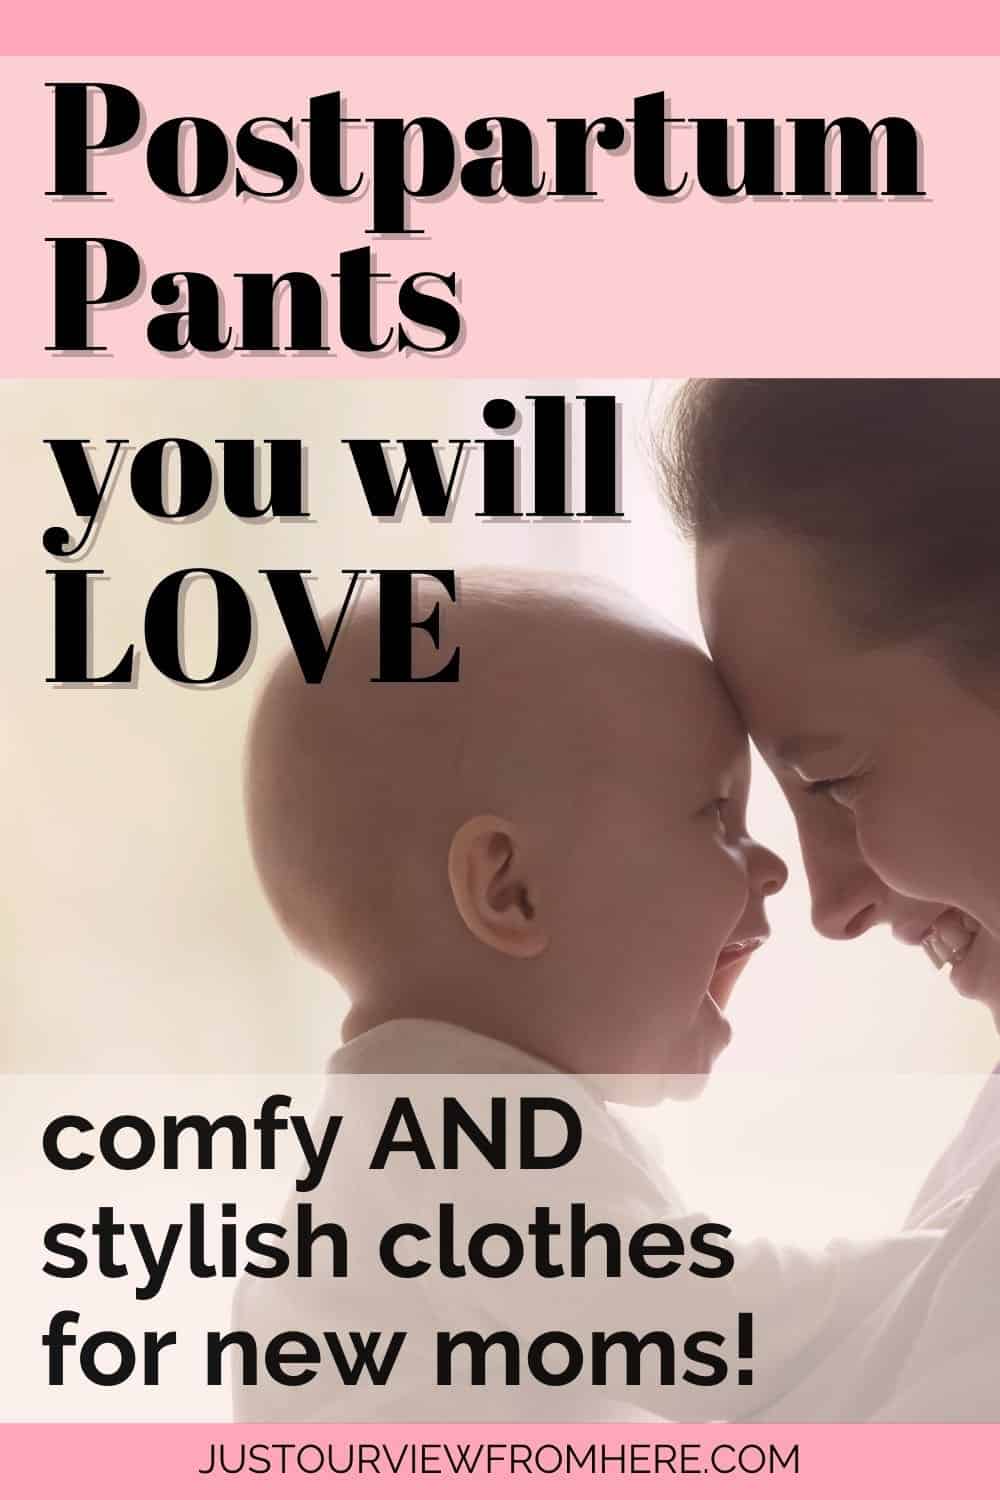 MOM AND NEW BABY SMILING FACE TO FACE, TEXT OVERLAY POSTPARTUM PANTS YOU WILL LOVE COMFY AND STYLISH CLOTHES FOR NEW MOMS